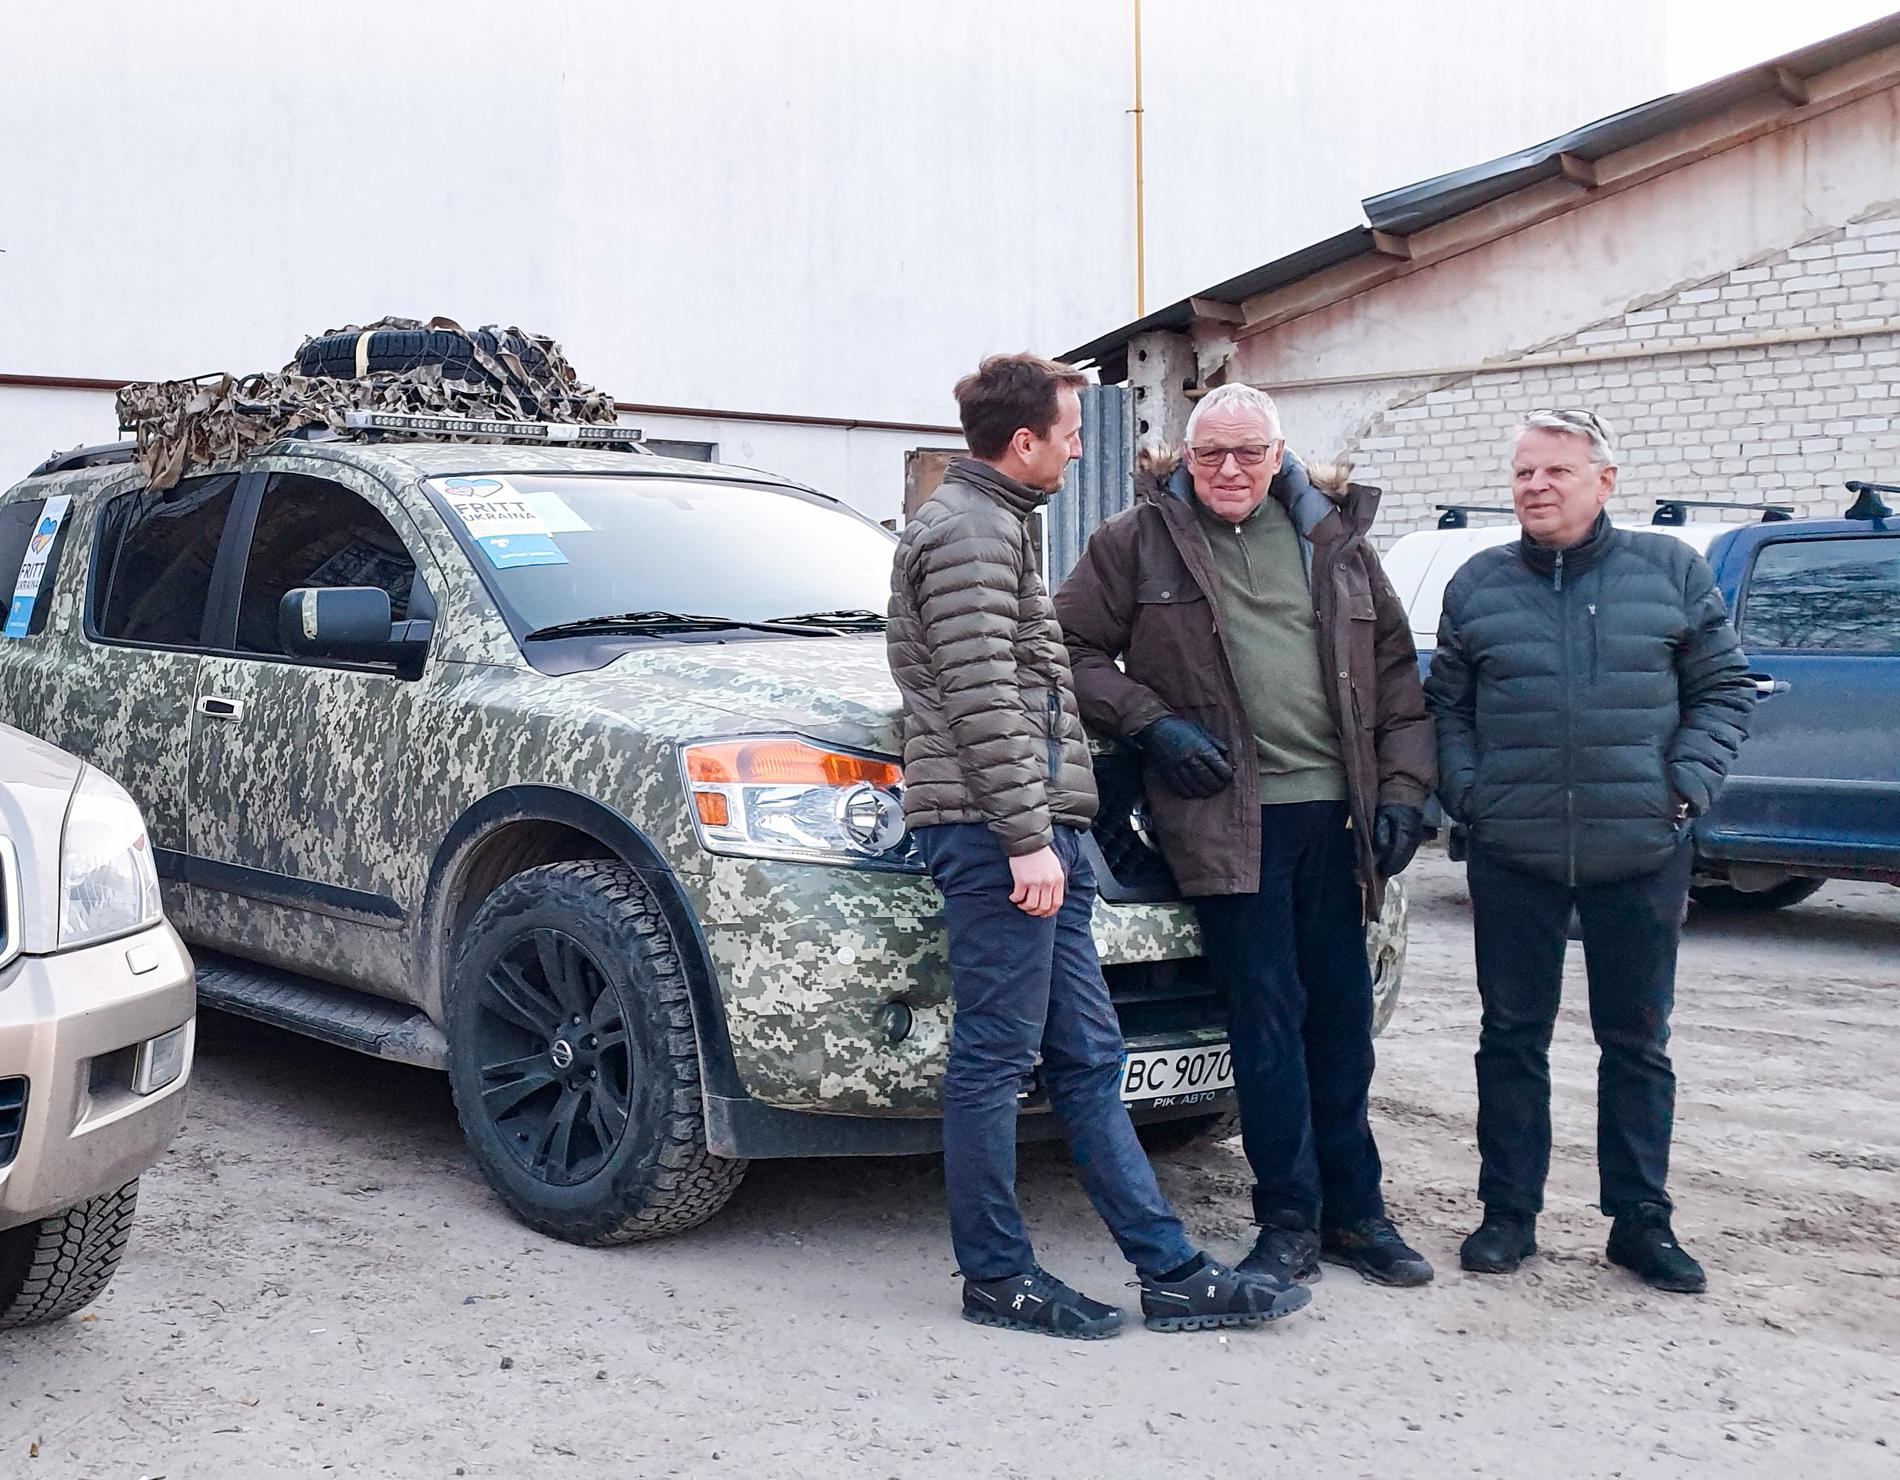 Writer and diplomat: Here they are sending drones, cars and radios to the Ukrainian front